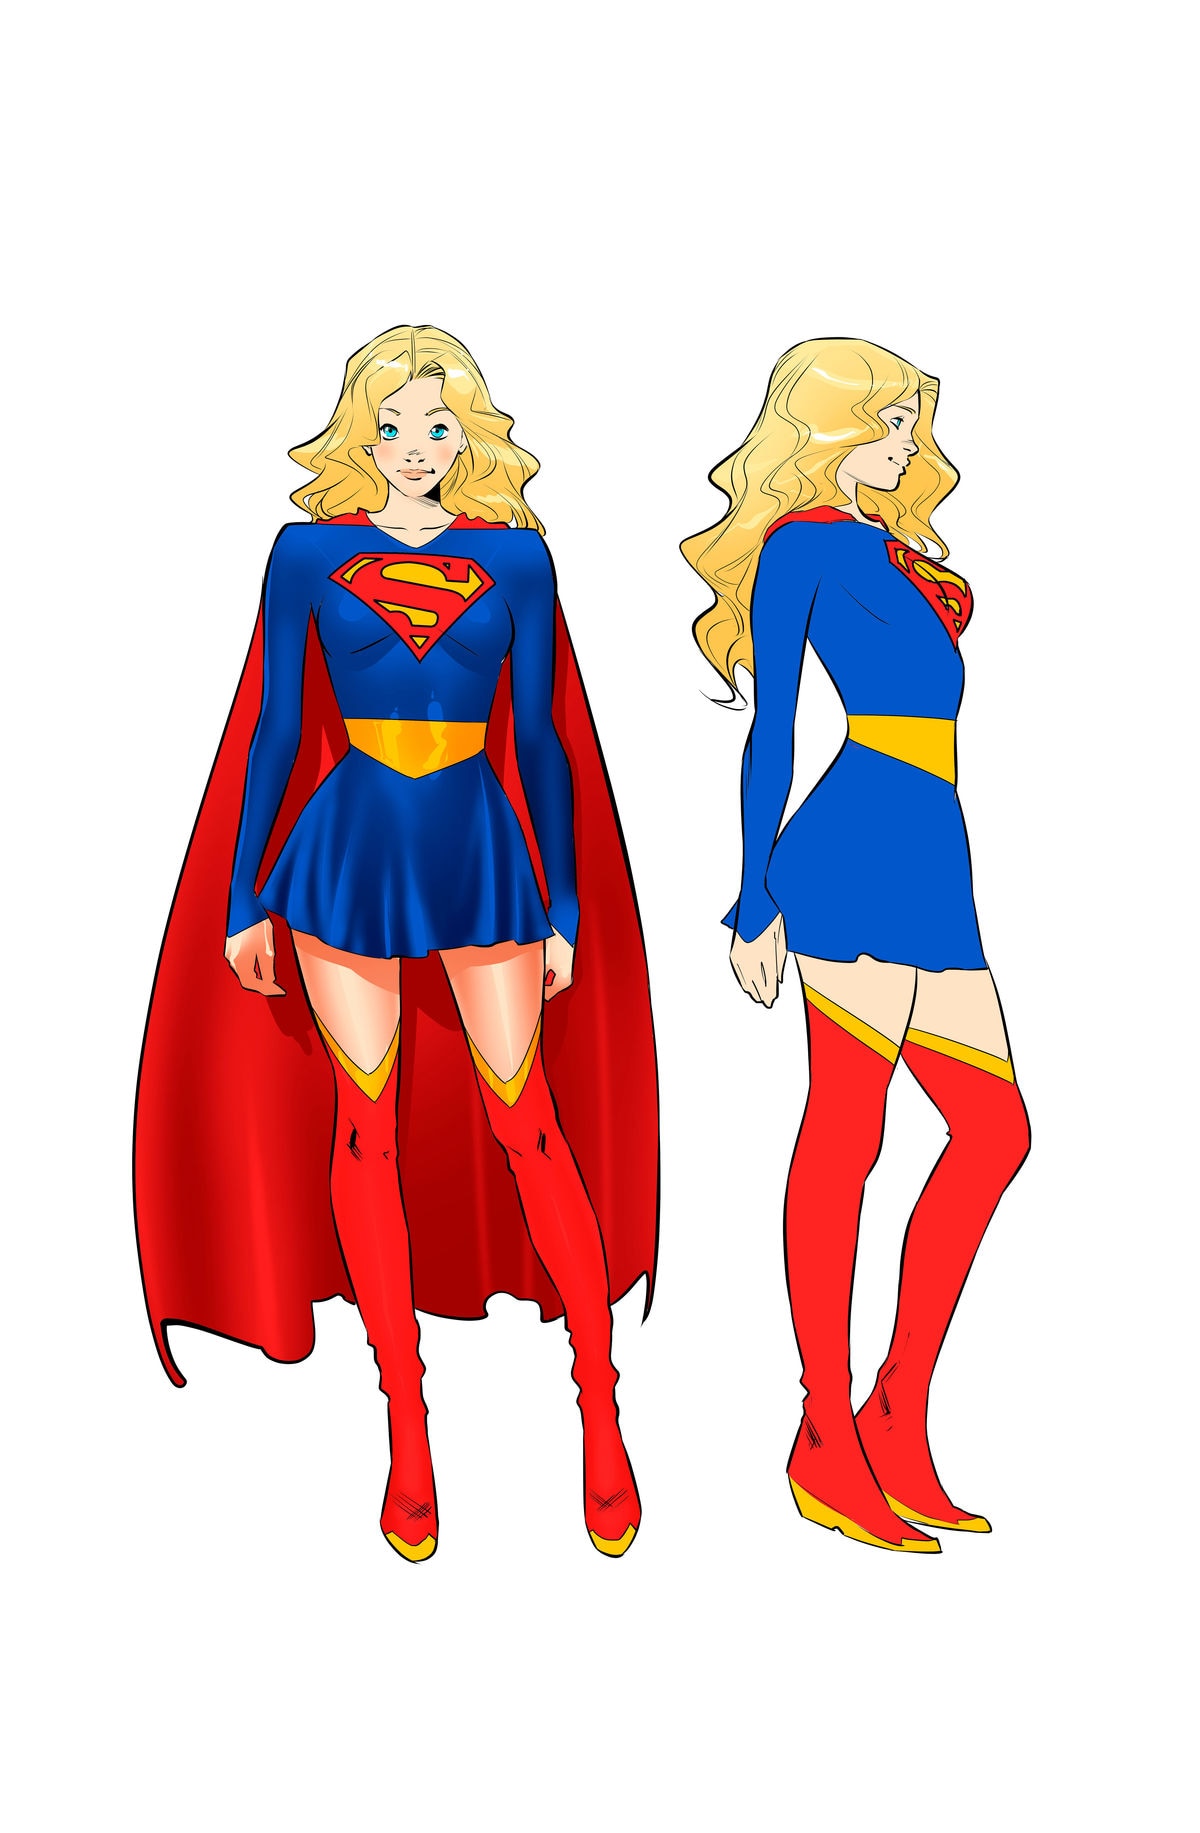 1000 - DC Comics : Annonces, Informations, News... - Page 7 Supergirl_a